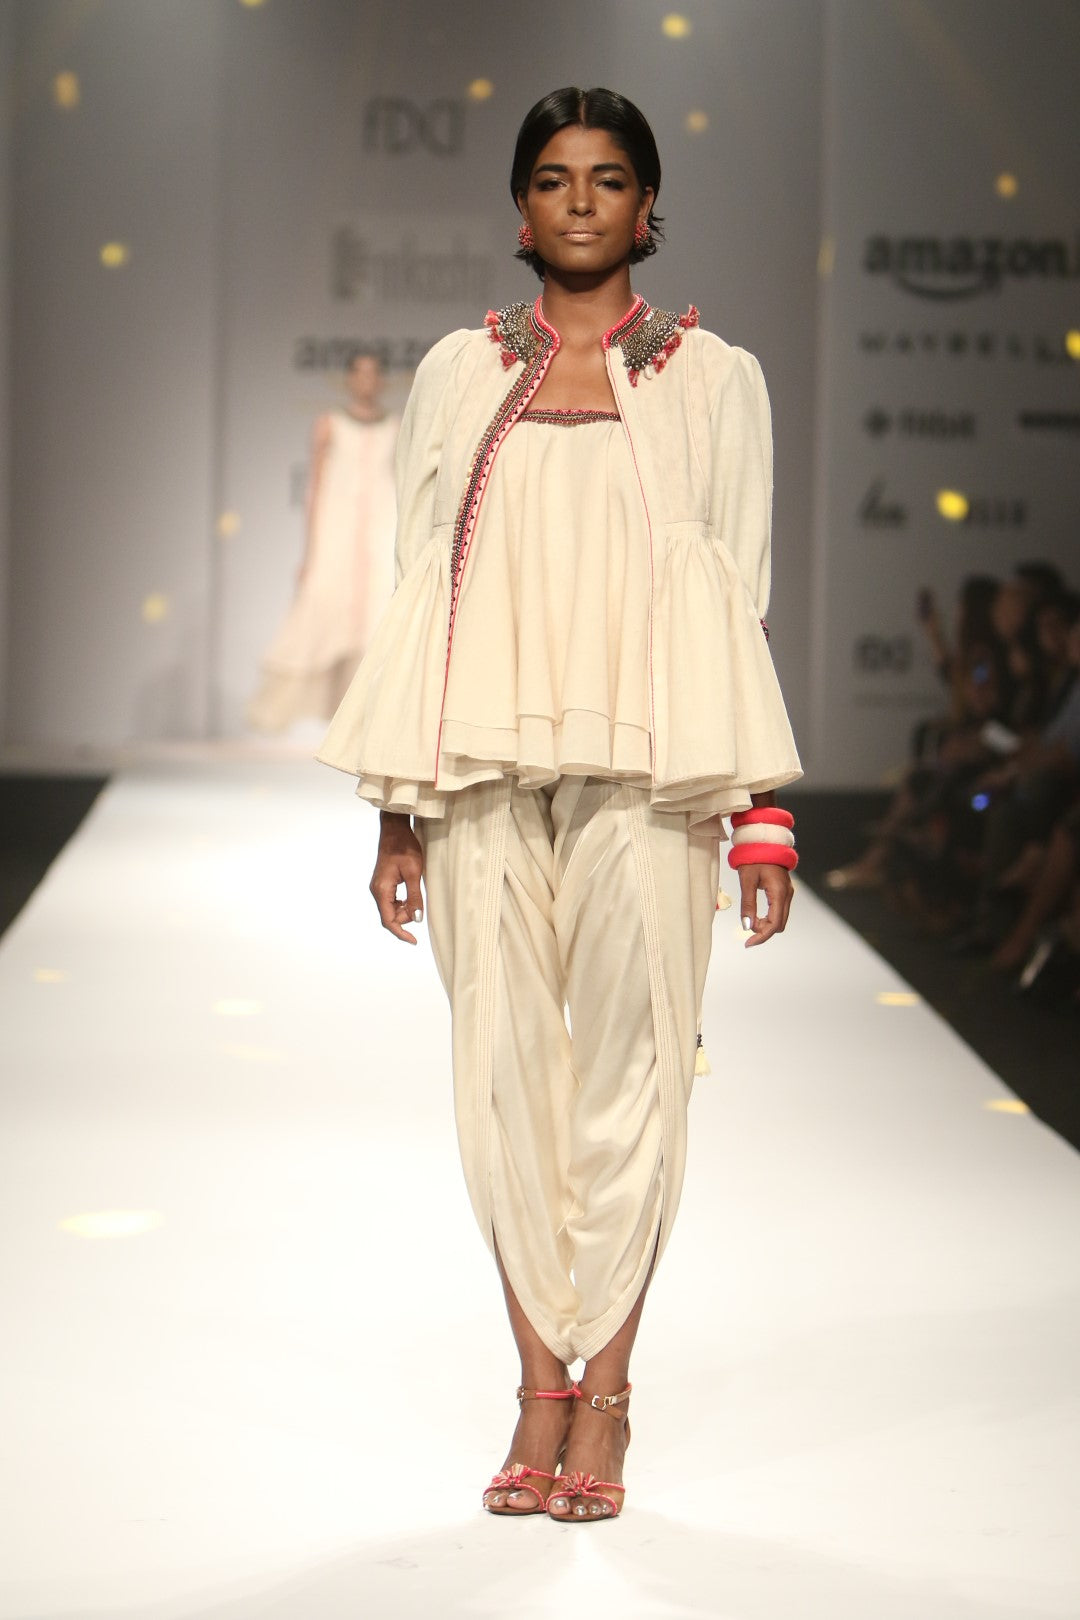 jacket with ruffled tube top with front open dhoti